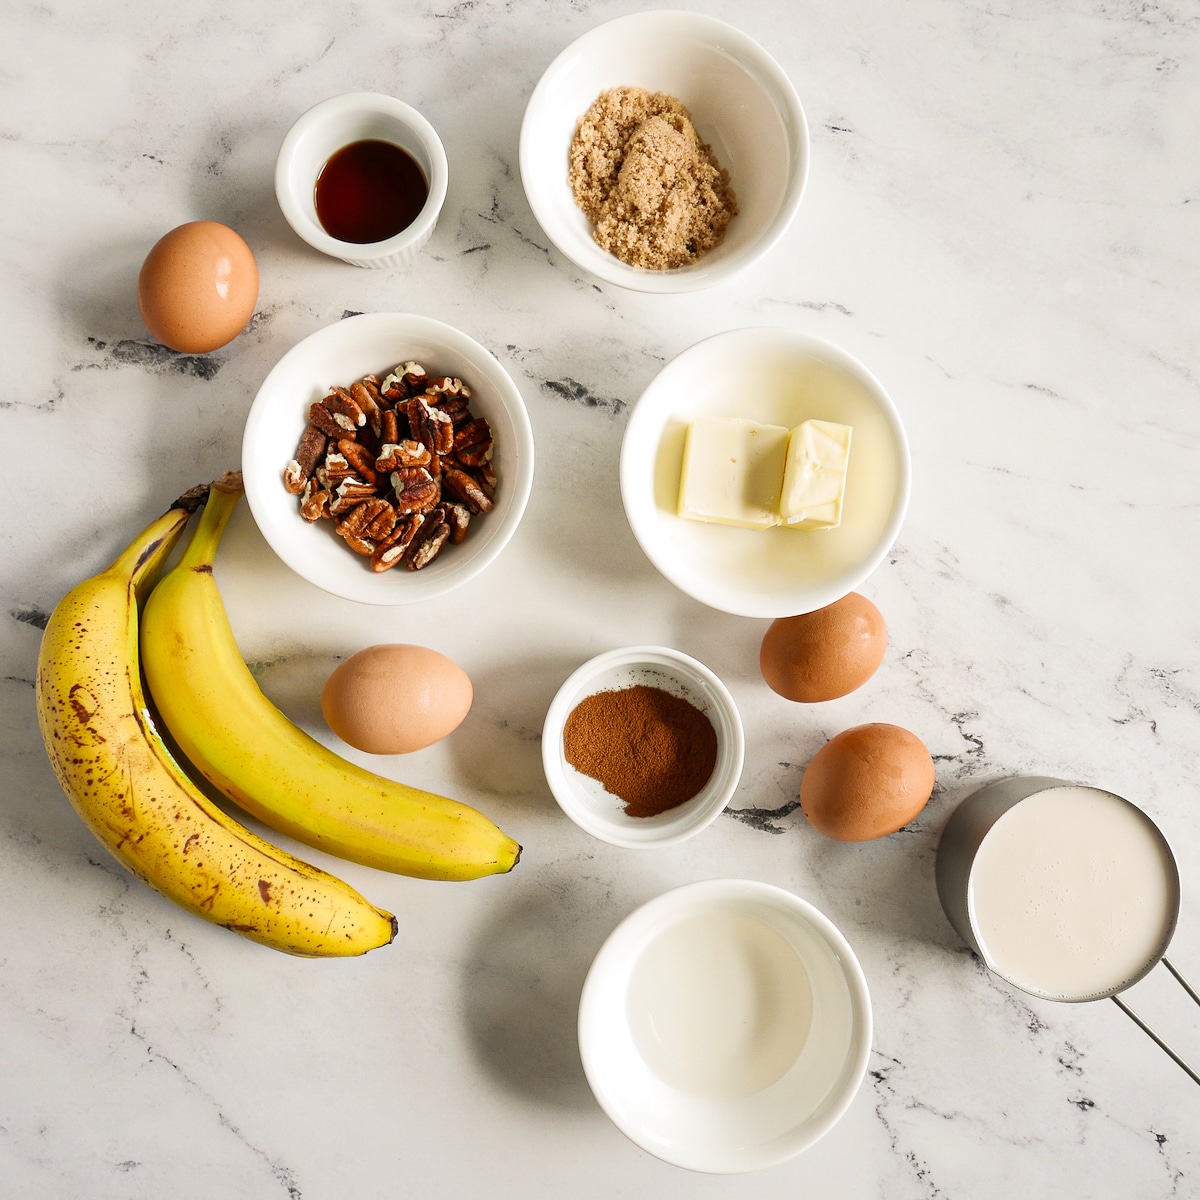 French toast ingredients arranged on a table.